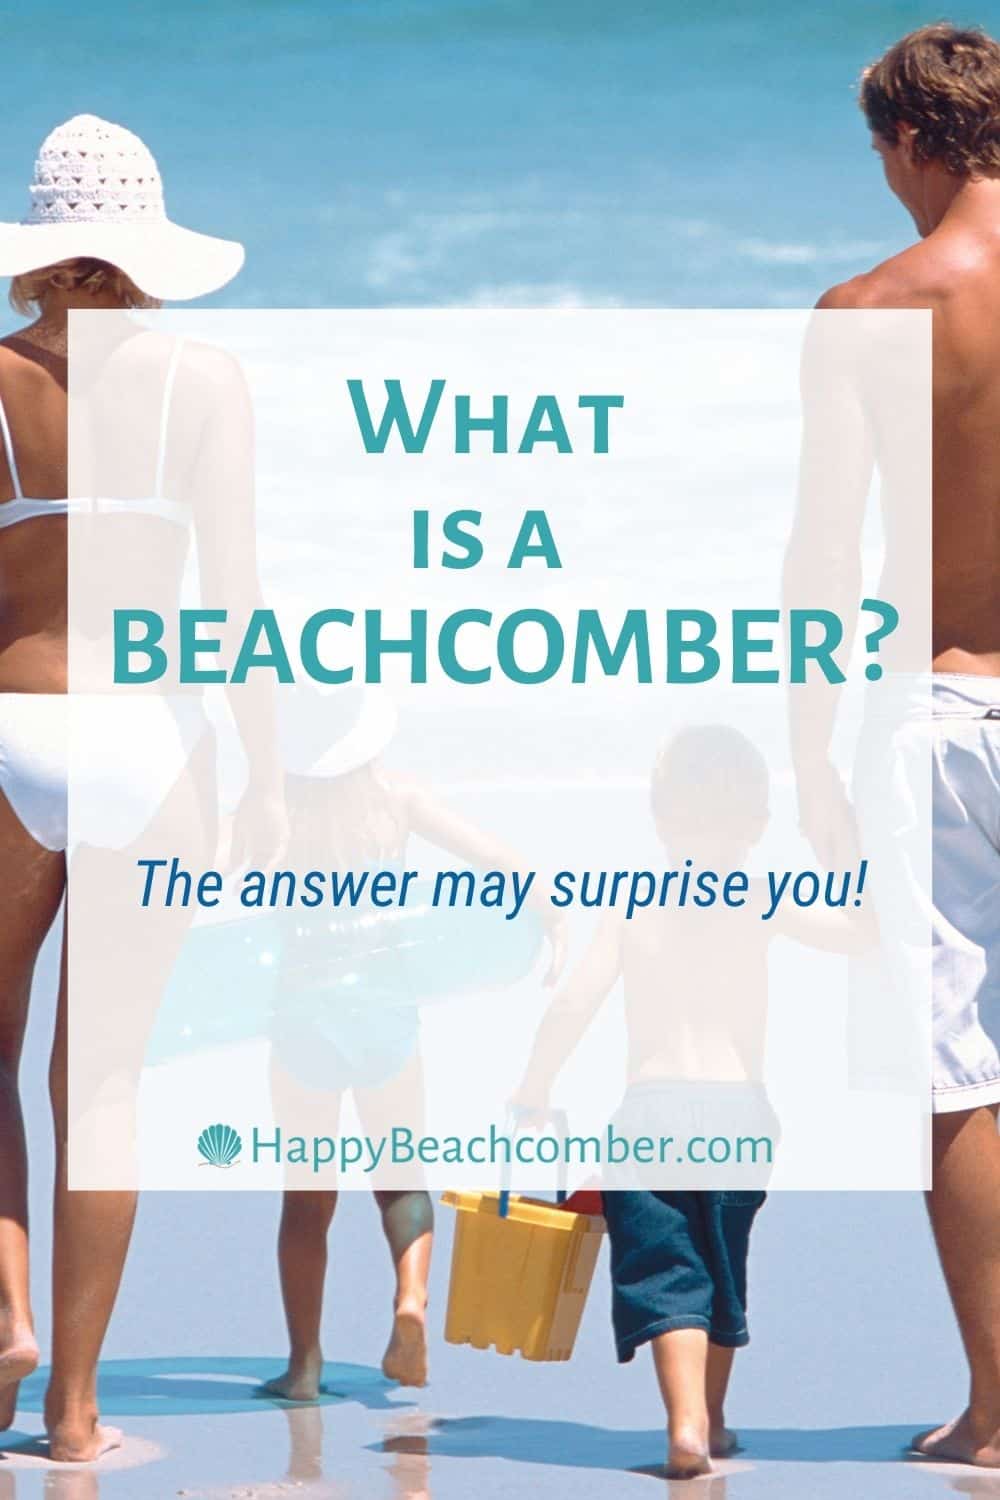 What is a beachcomber?